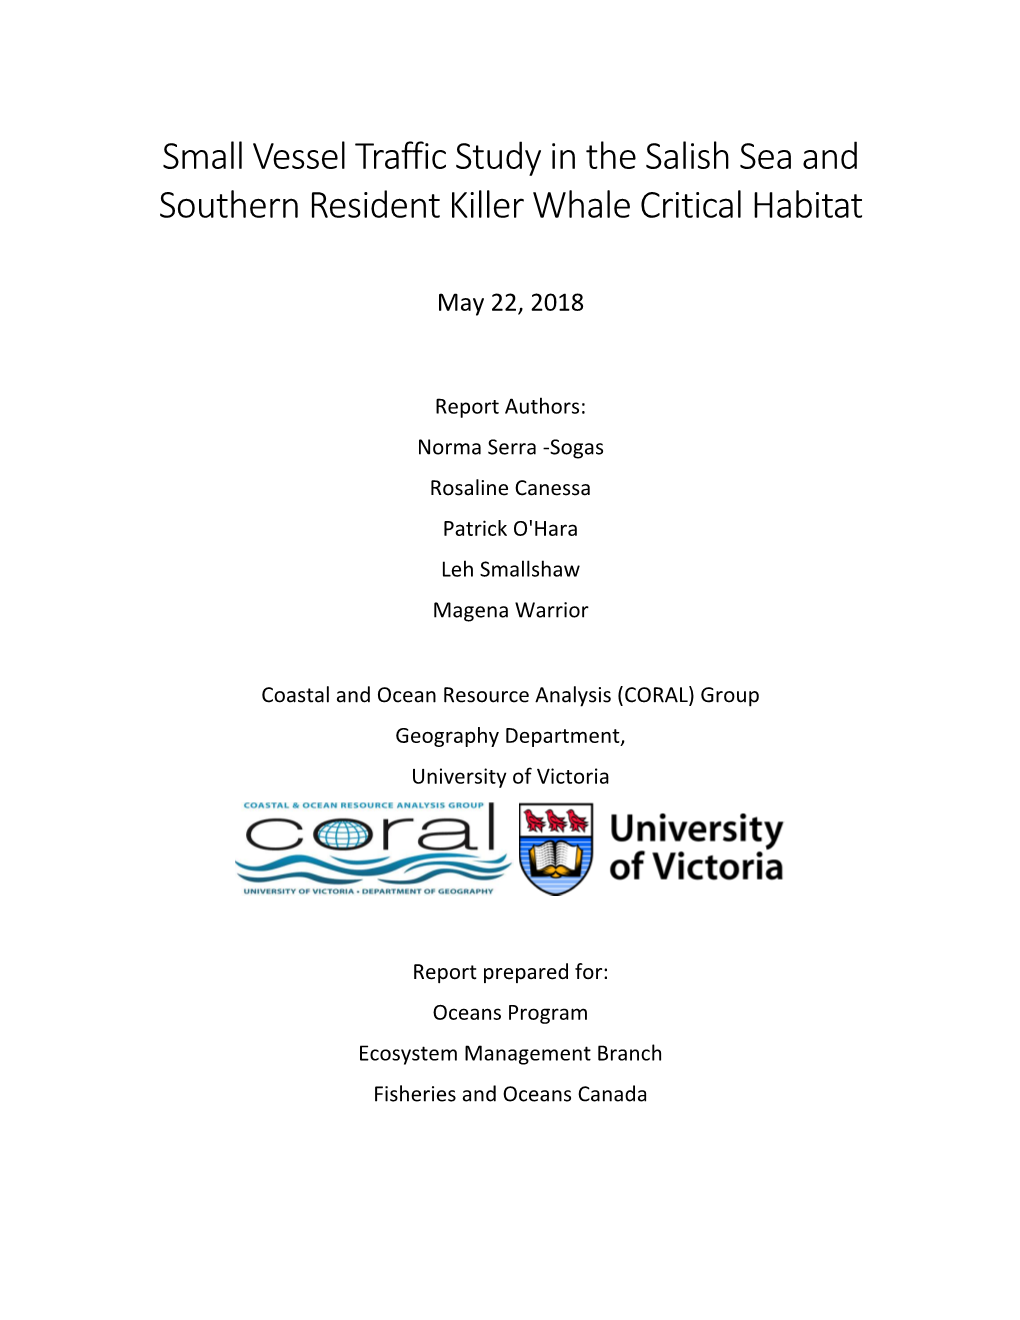 Small Vessel Traffic Study in the Salish Sea and Southern Resident Killer Whale Critical Habitat